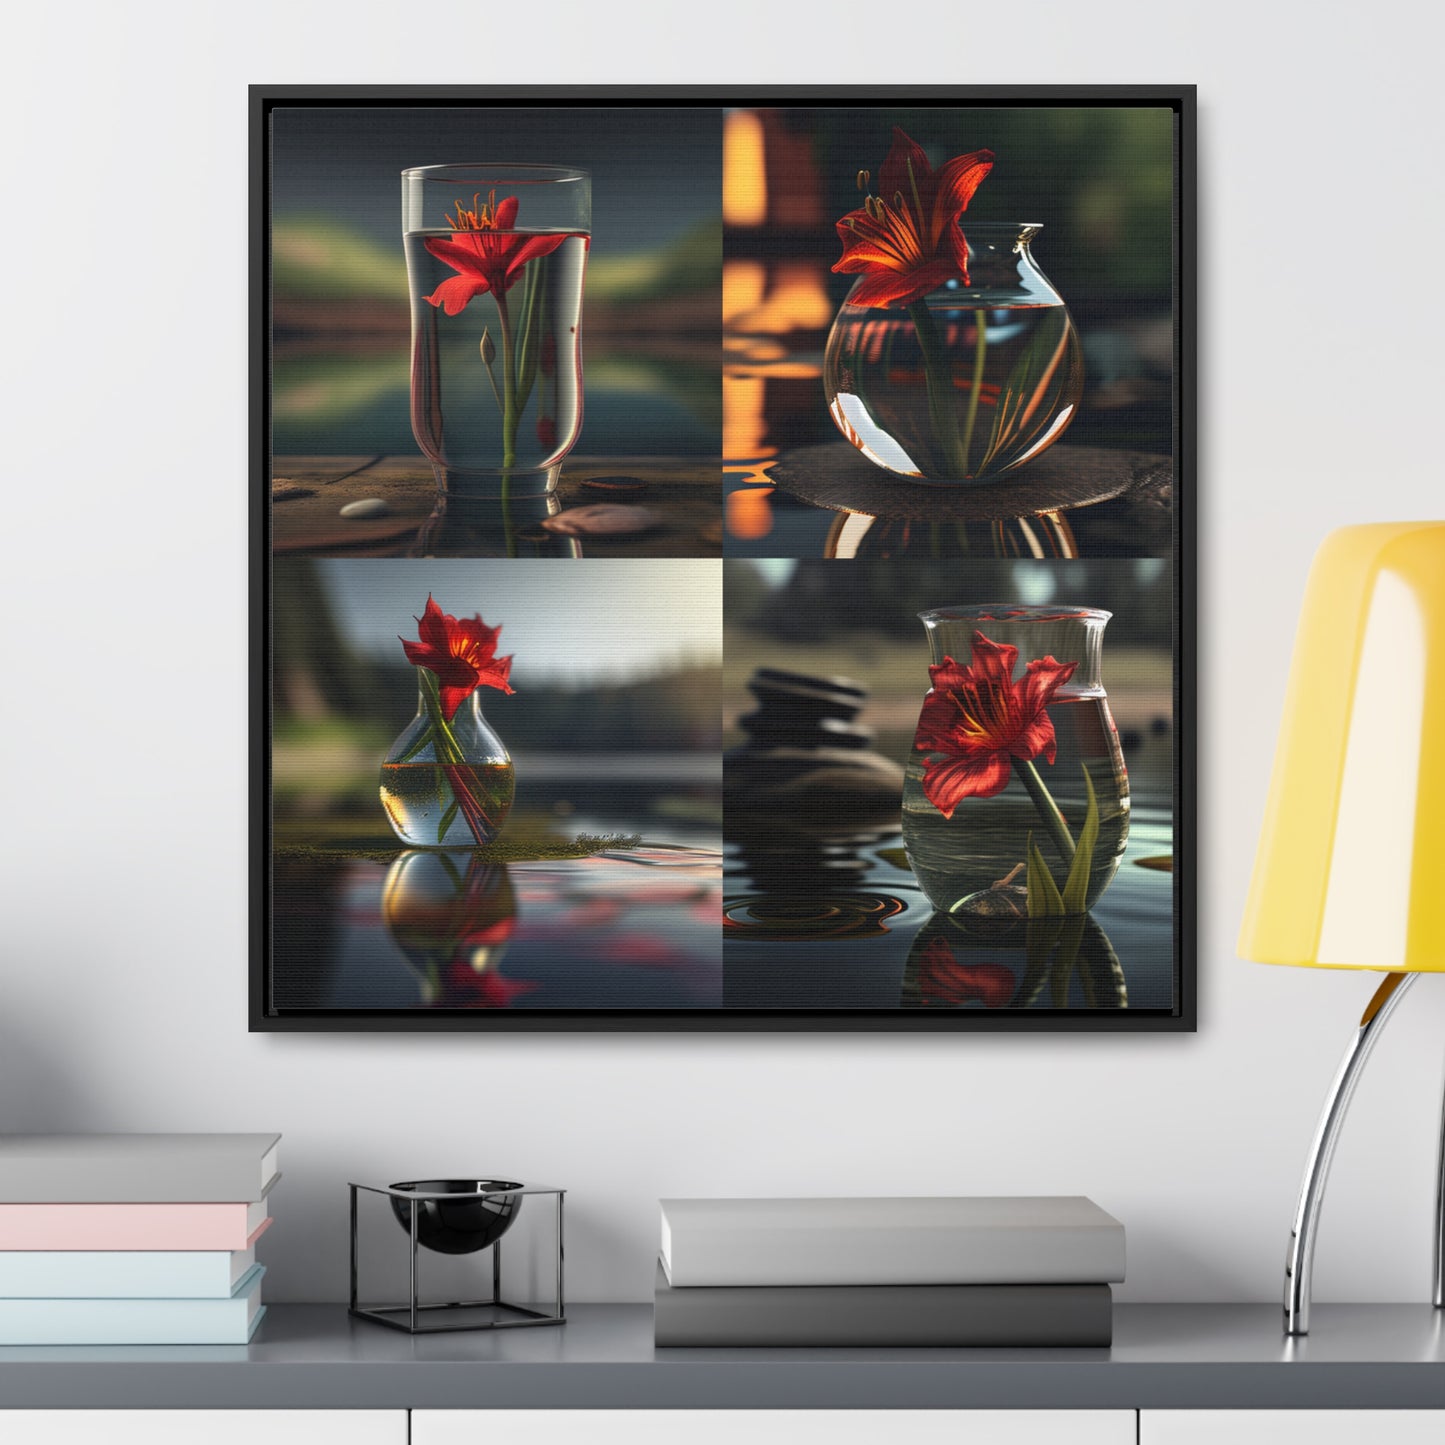 Gallery Canvas Wraps, Square Frame Red Lily in a Glass vase 5